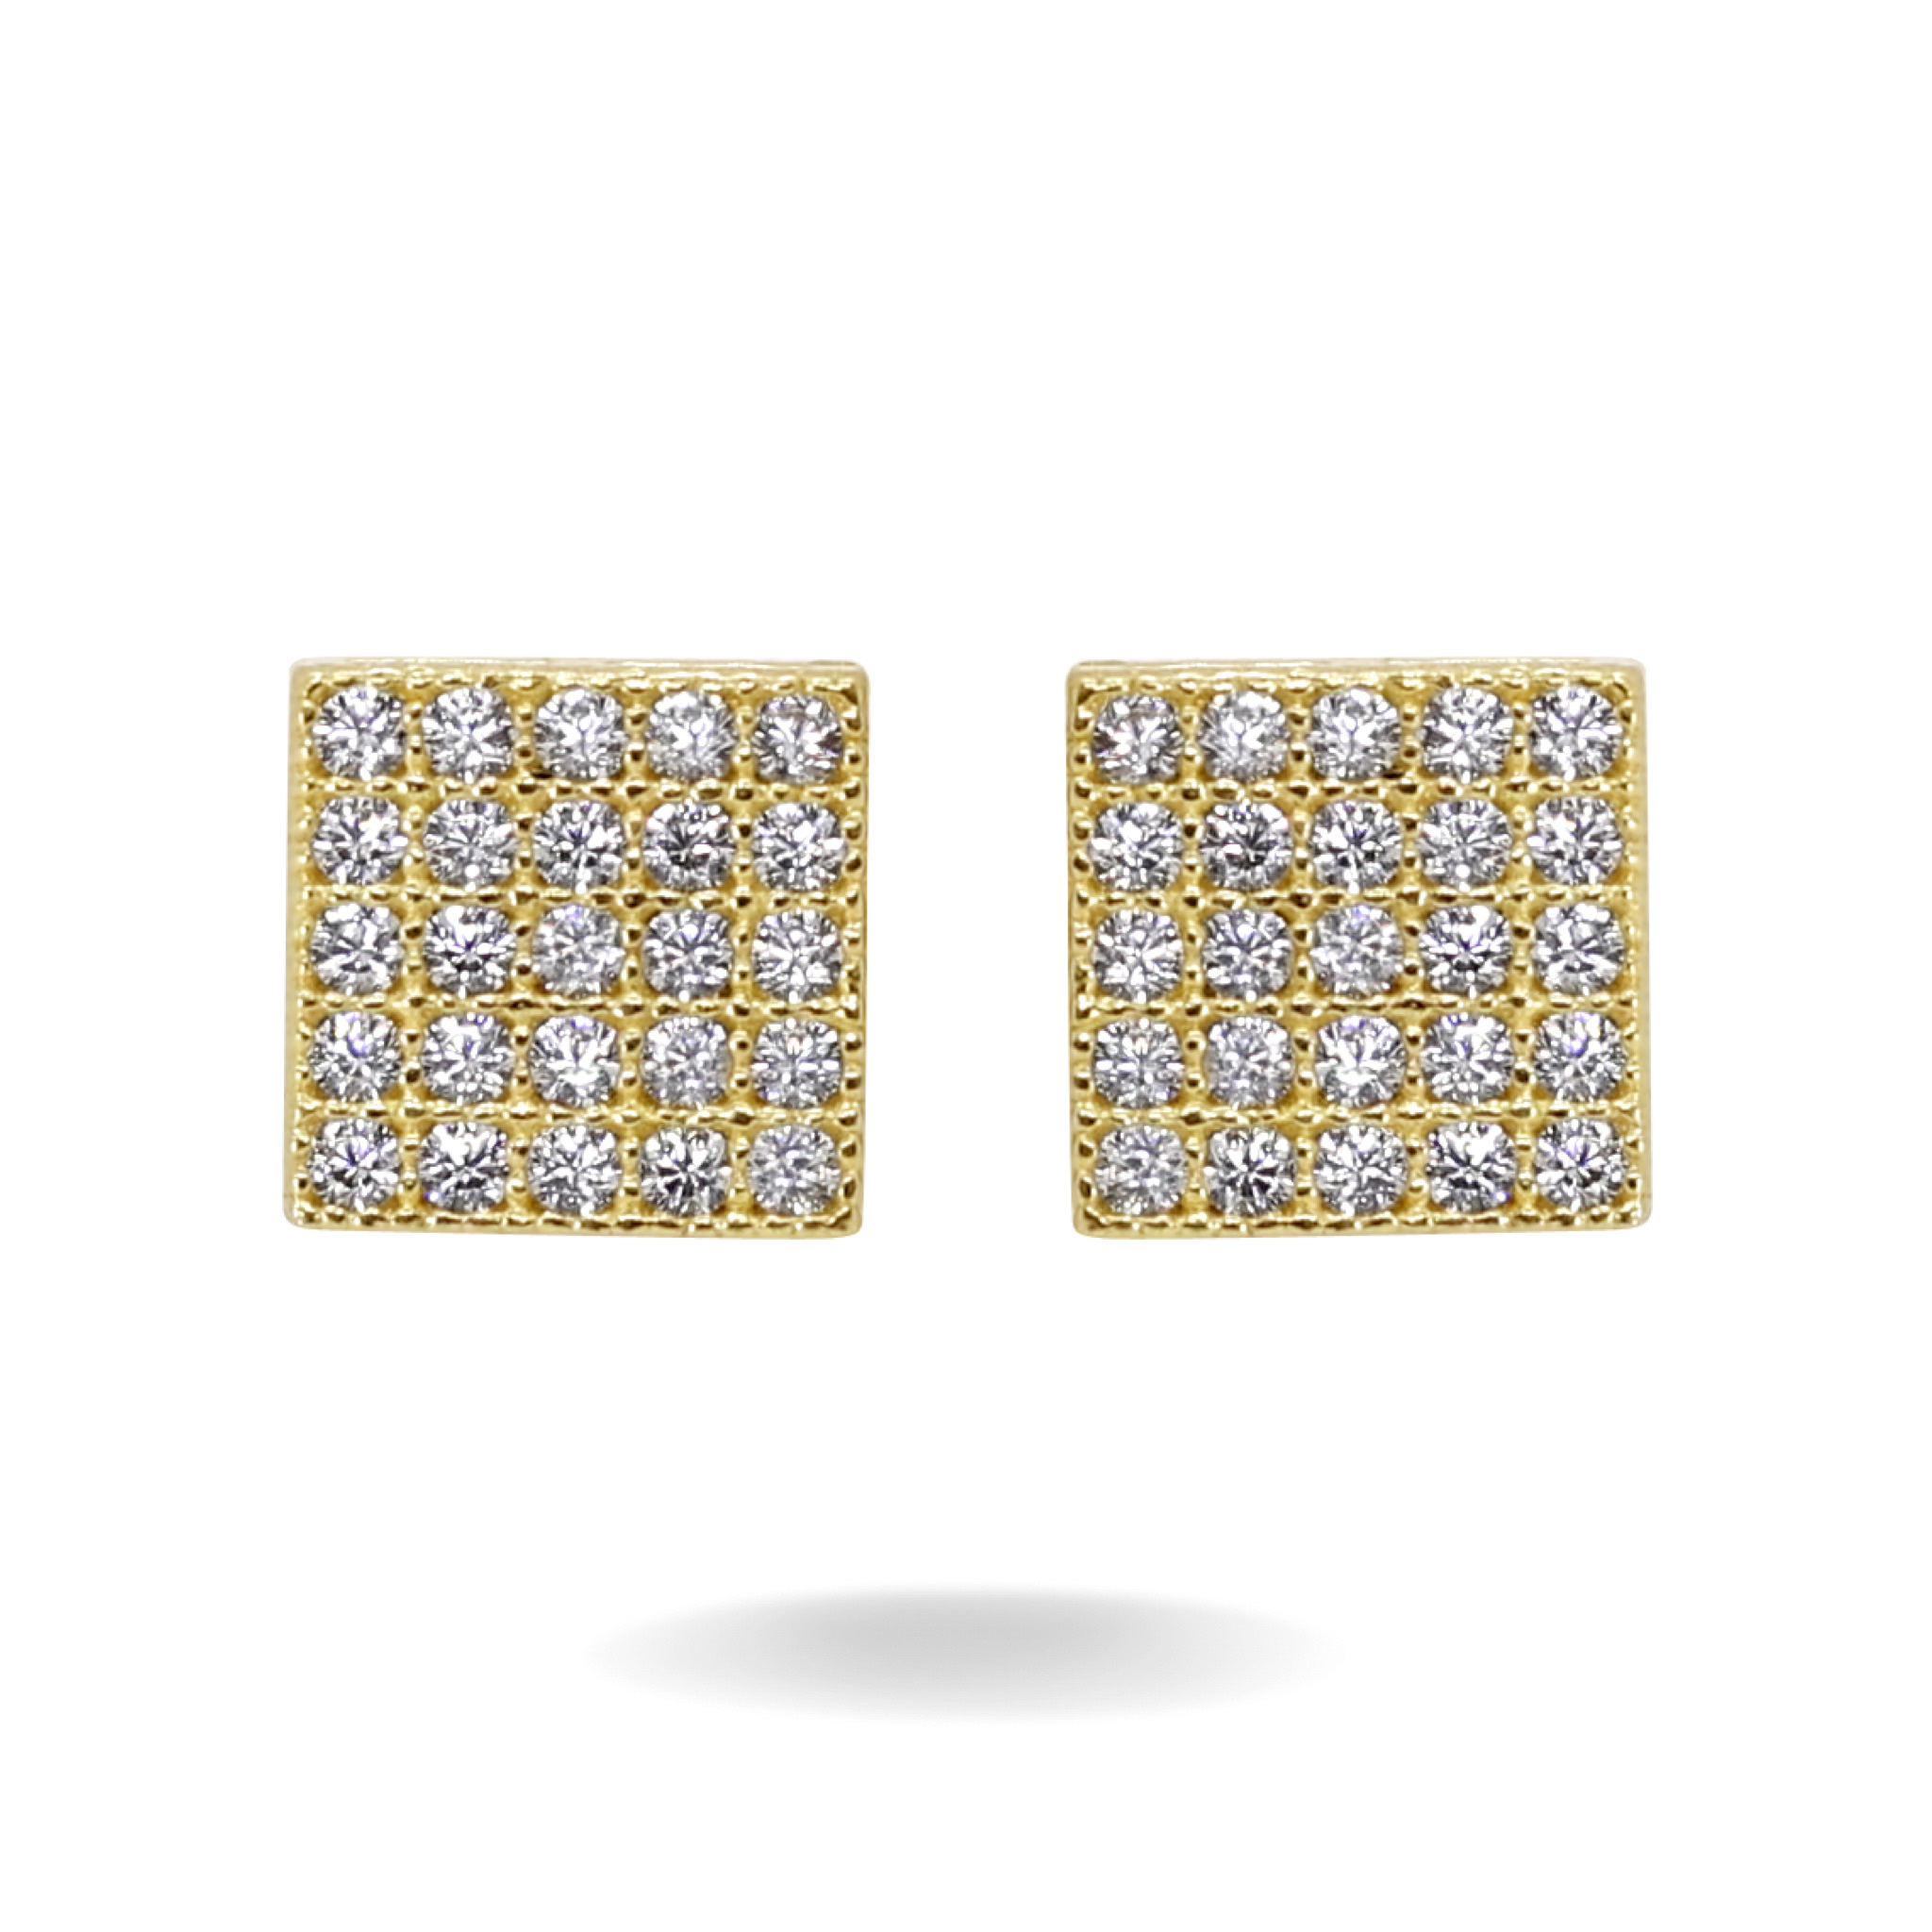 10K YELLOW GOLD PAVE SQUARE STUD EARRINGS -7.5MM